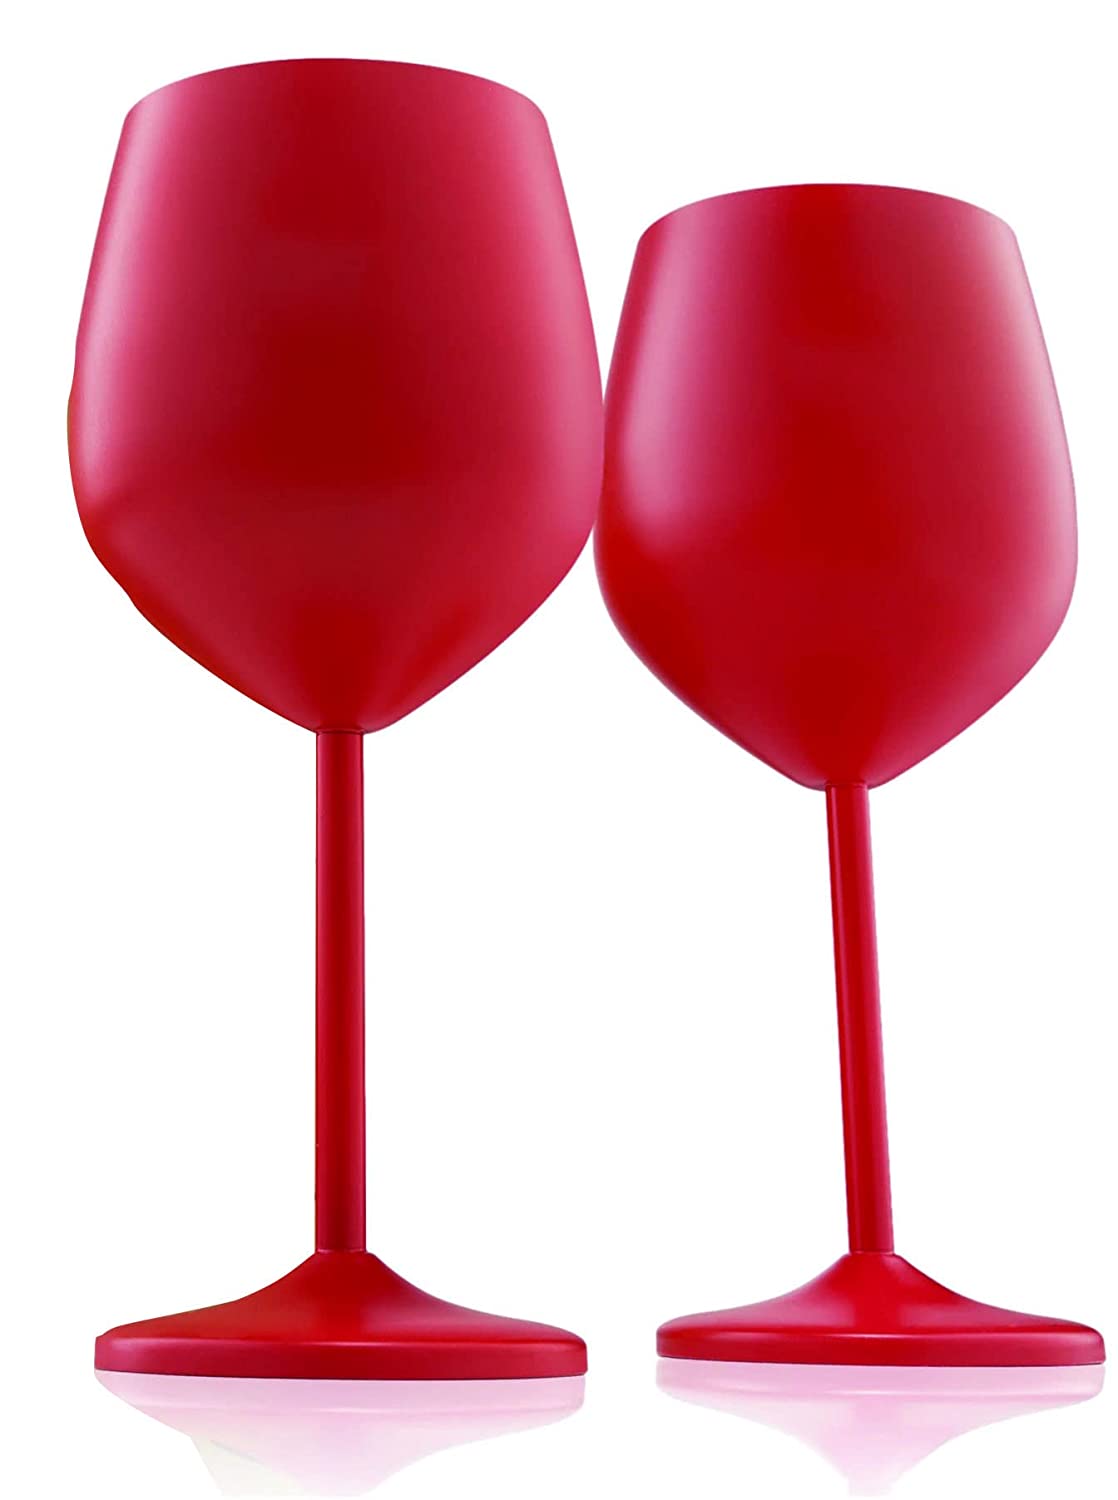 NJ Red Wine Glasses, Shatter Proof Red Coated Steel Unbreakable Wine Glass Goblets, Gift for Men and Women, Party Supplies - 350 ml: Set of 2 Pcs